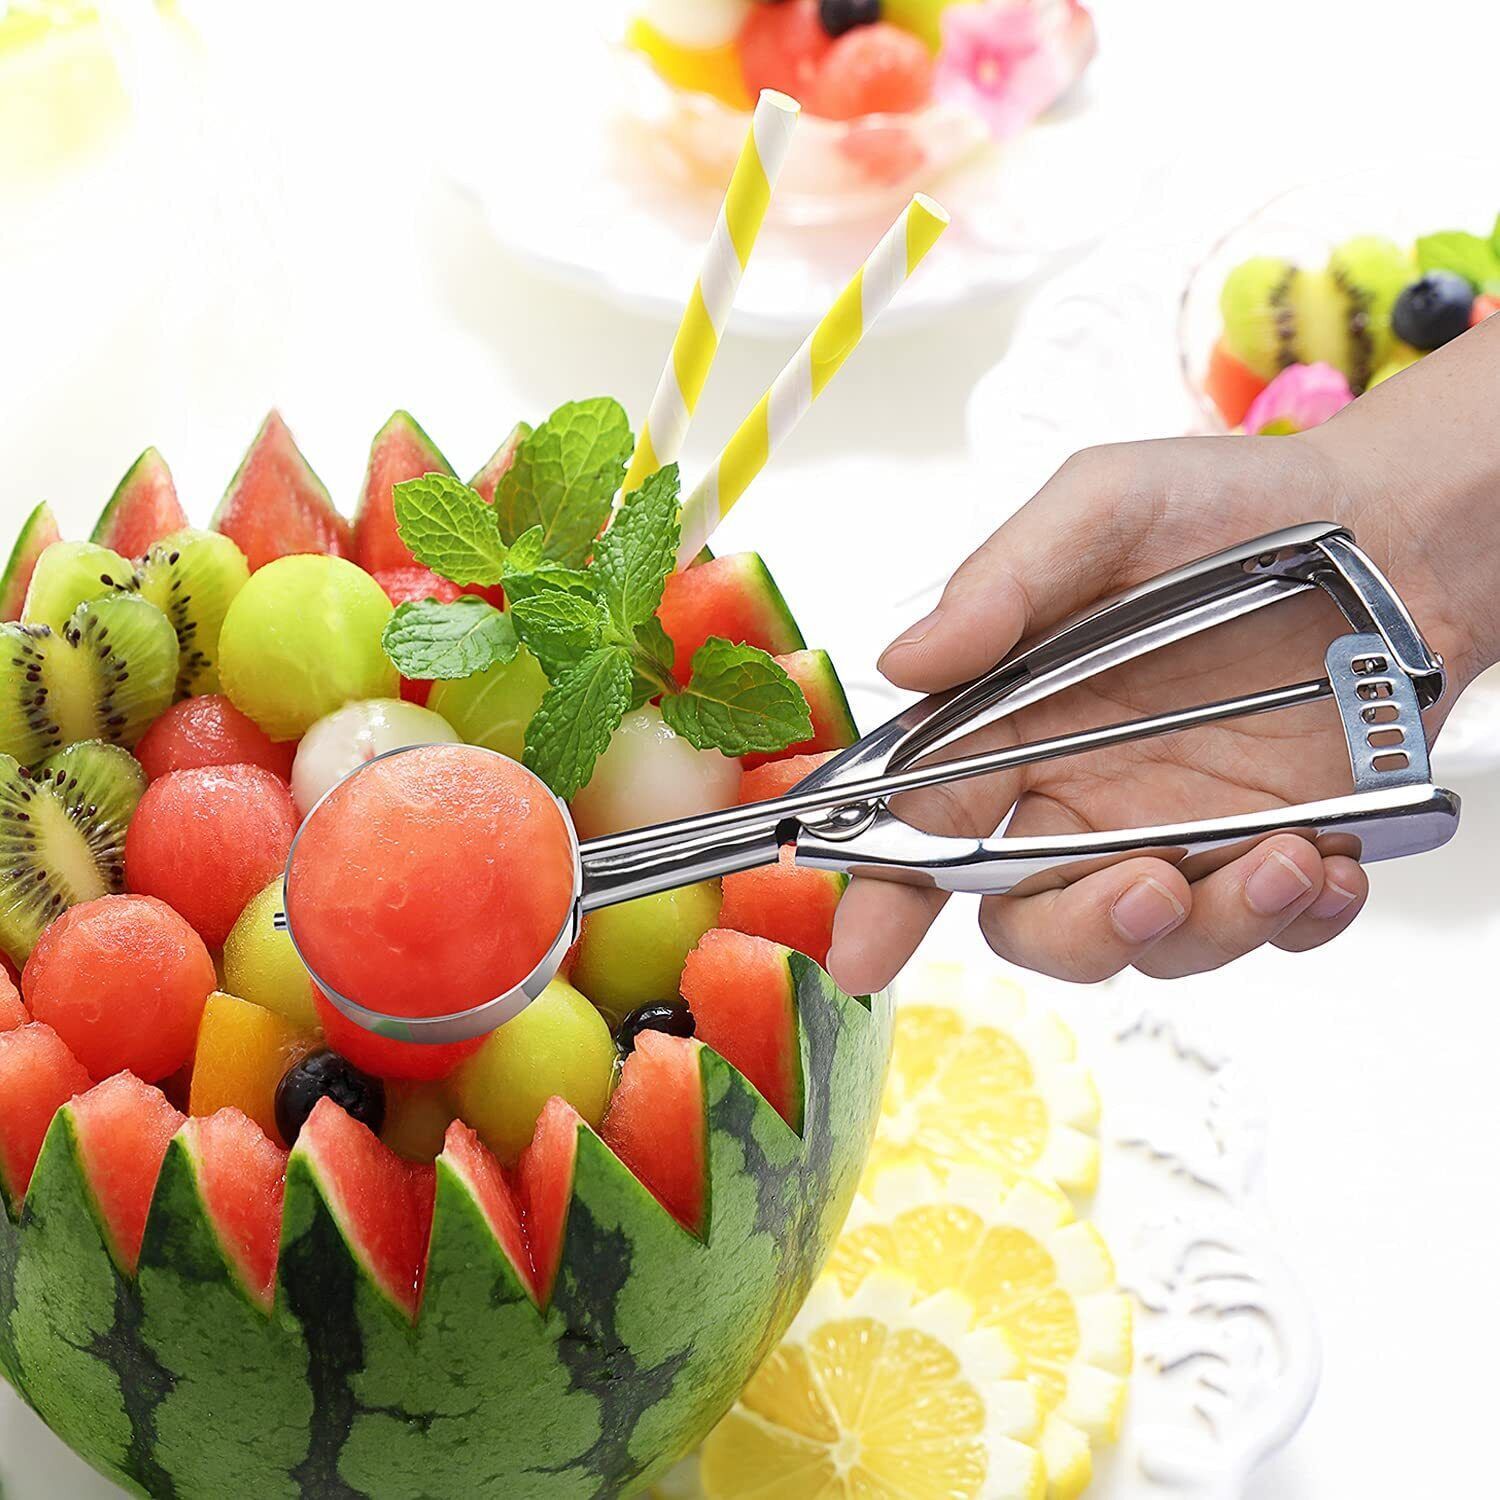 18/8 Stainless Steel Large Ice Cream Scoop Disher Melon Baller 4 Tablespoon